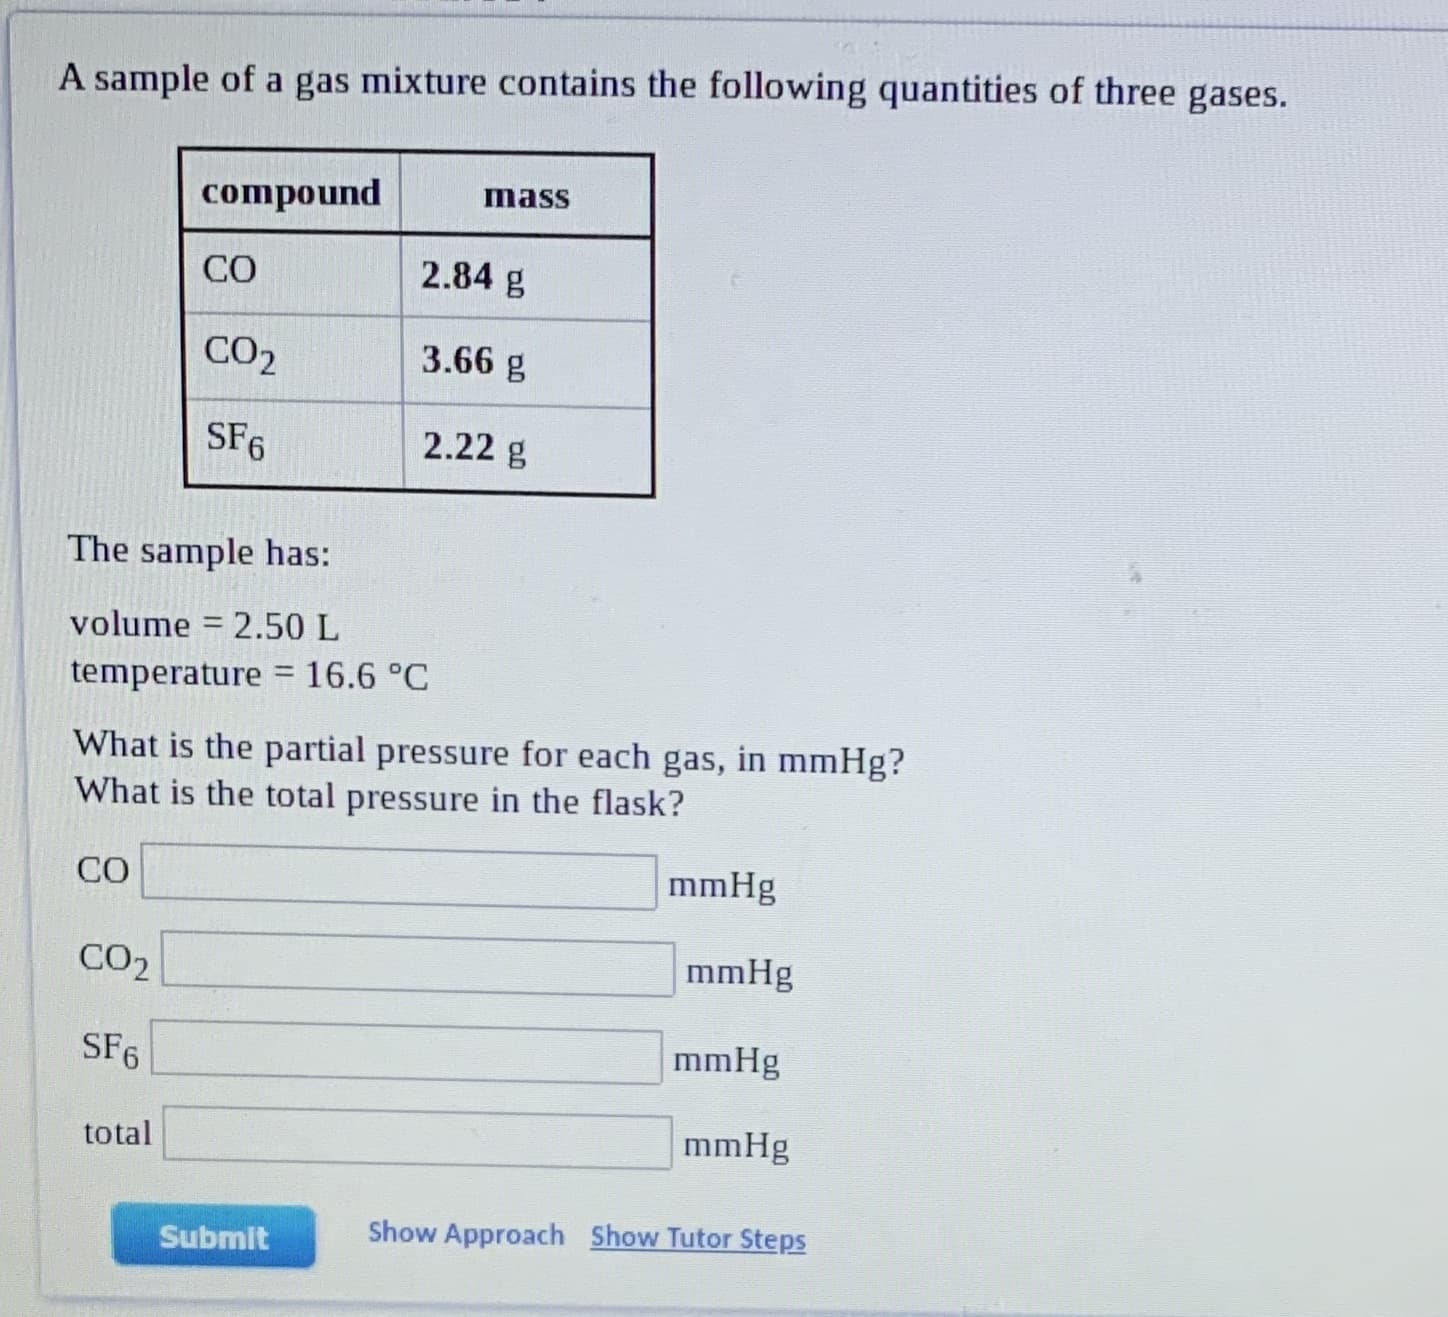 A sample of a gas mixture contains the following quantities of three gases.
compound
Imass
CO
2.84 g
CO2
3.66 g
SF6
2.22 g
The sample has:
volume = 2.50 L
temperature = 16.6 °C
What is the partial pressure for each gas, in mmHg?
What is the total pressure in the flask?
CO
mmHg
CO2
mmHg
SF6
mmHg
total
mmHg
Submit
Show Approach Show Tutor Steps
